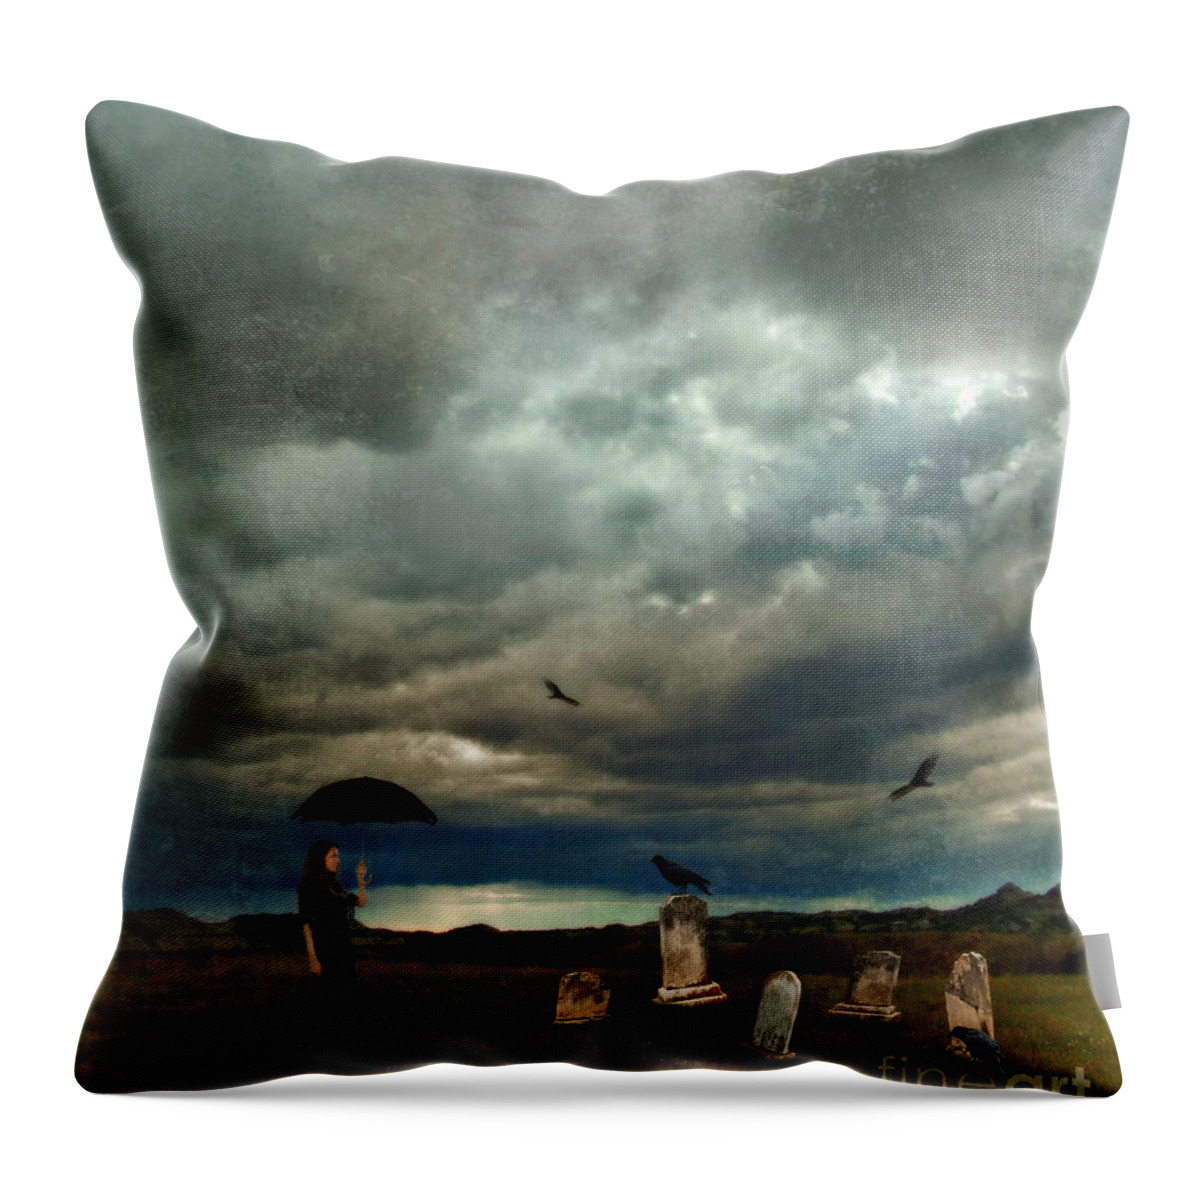 Woman Throw Pillow featuring the photograph Lady in Graveyard by Jill Battaglia